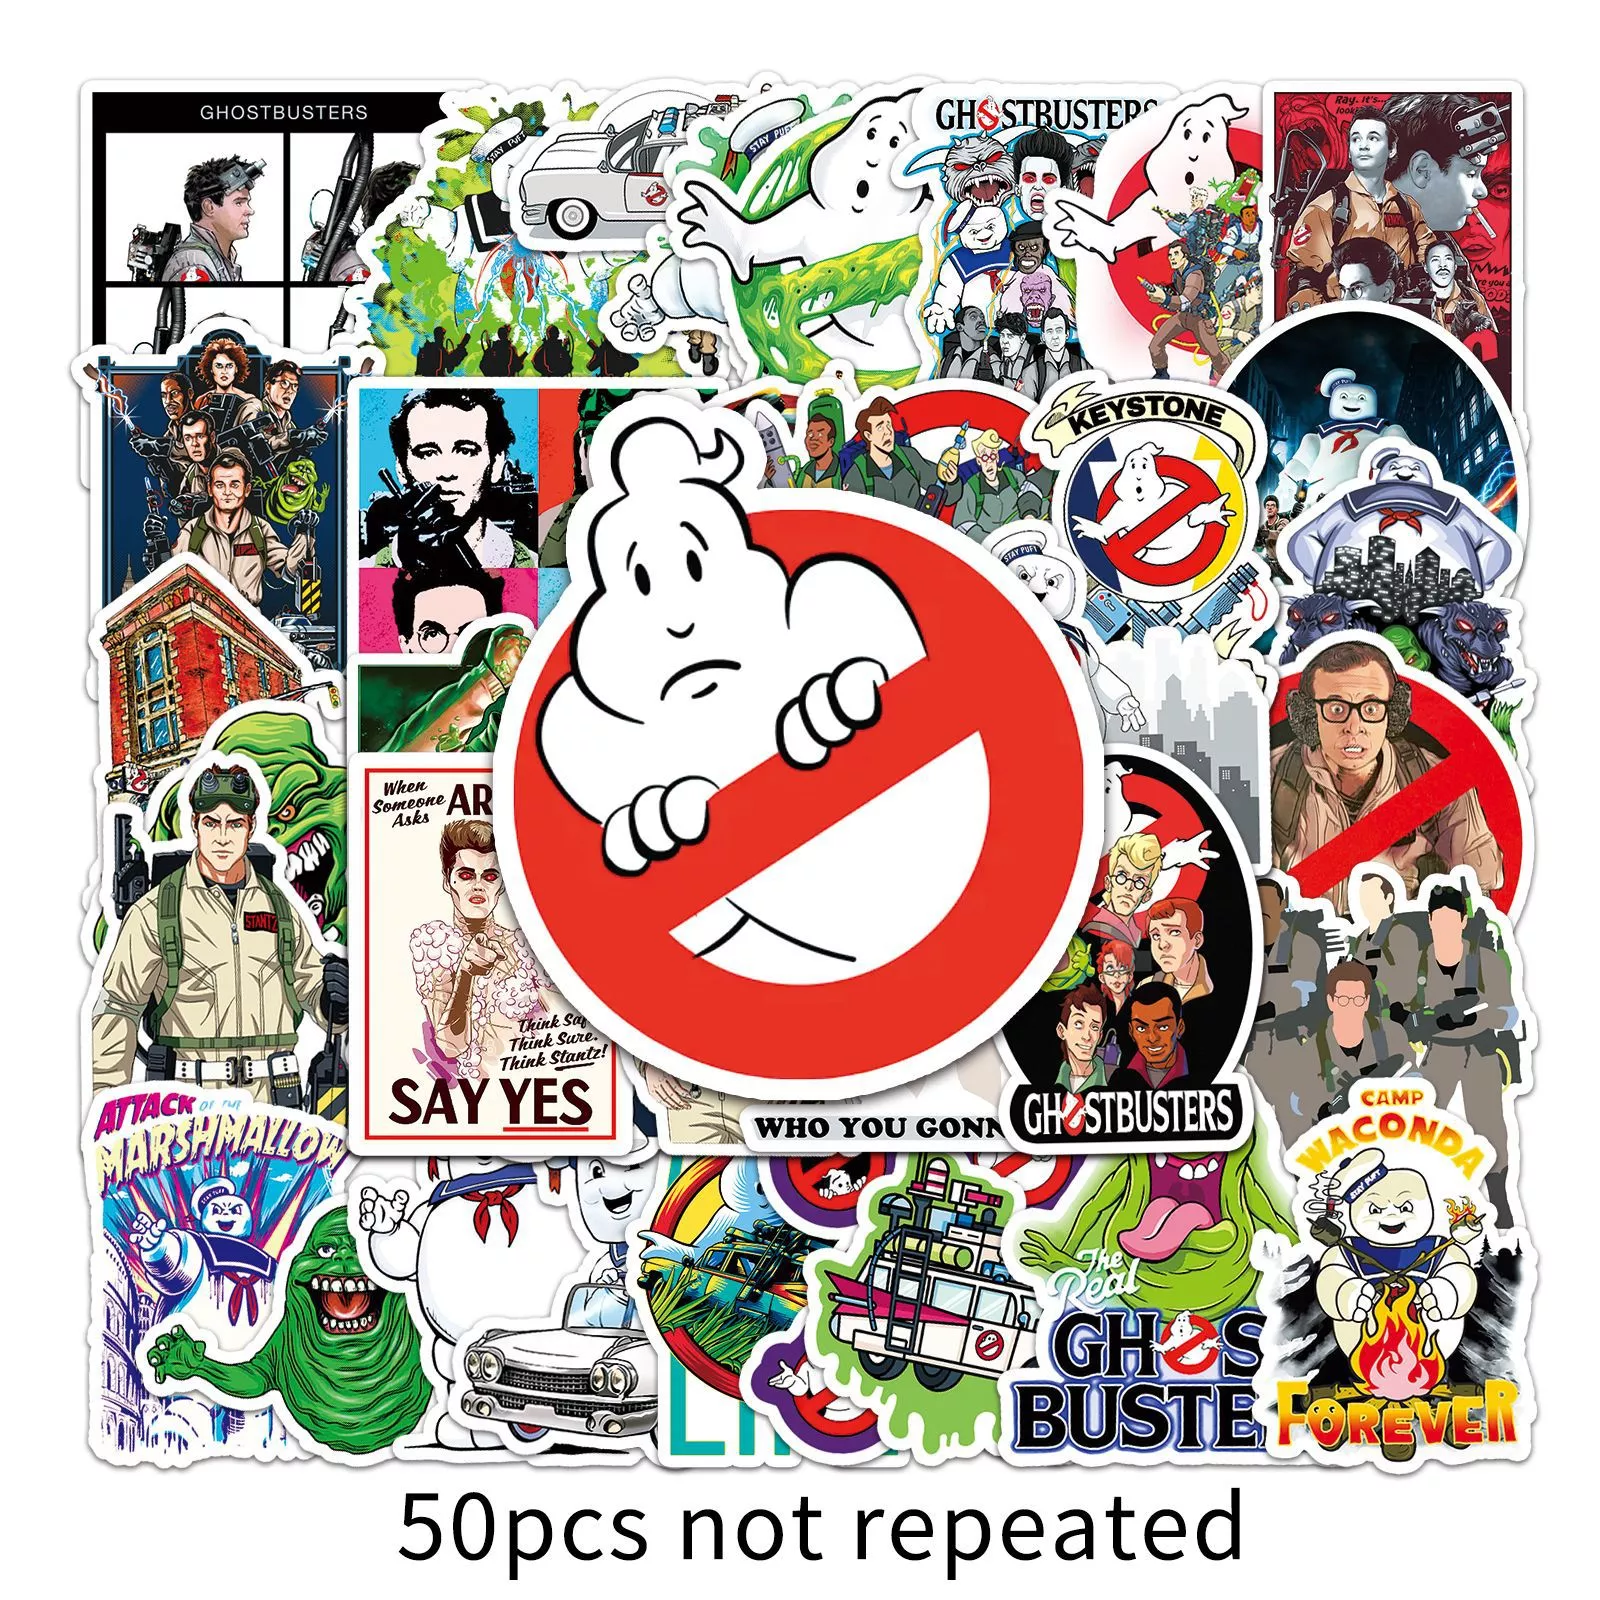 10/30/50pcs  Ghostbuster U.s. Drama Stickers Scooter Luggage Compartment Scrapbook Notebook Computer Diycar Motorcycle Stickers 10 30 50pcs american drama graffiti creative stickers stickers scrapbook luggage guitar mobile phone toy stickers wholesale